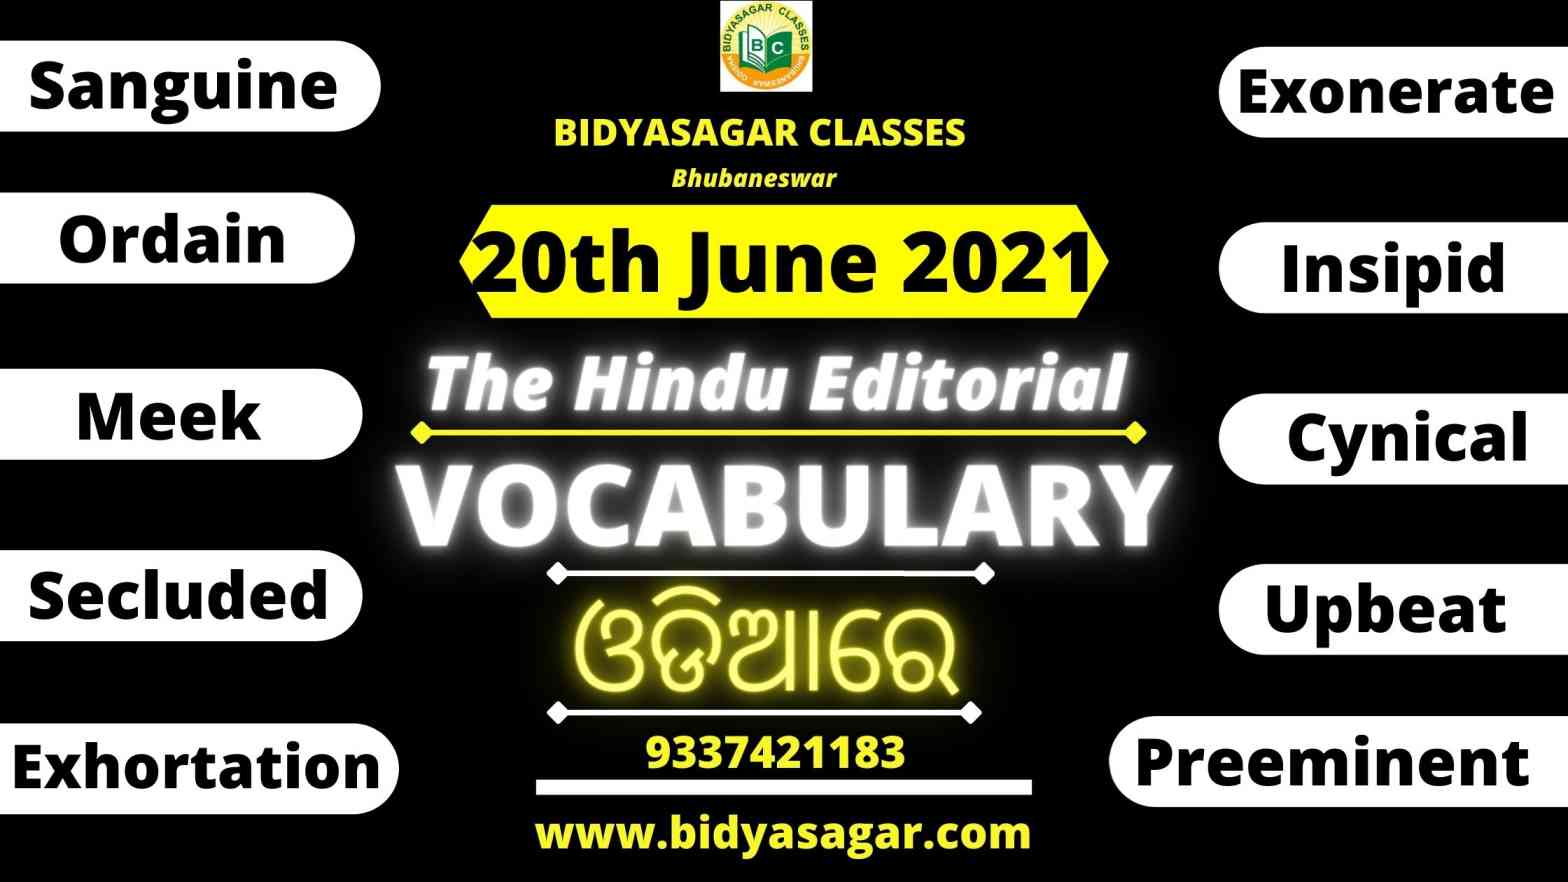 The Hindu Editorial Vocabulary of 20th June 2021